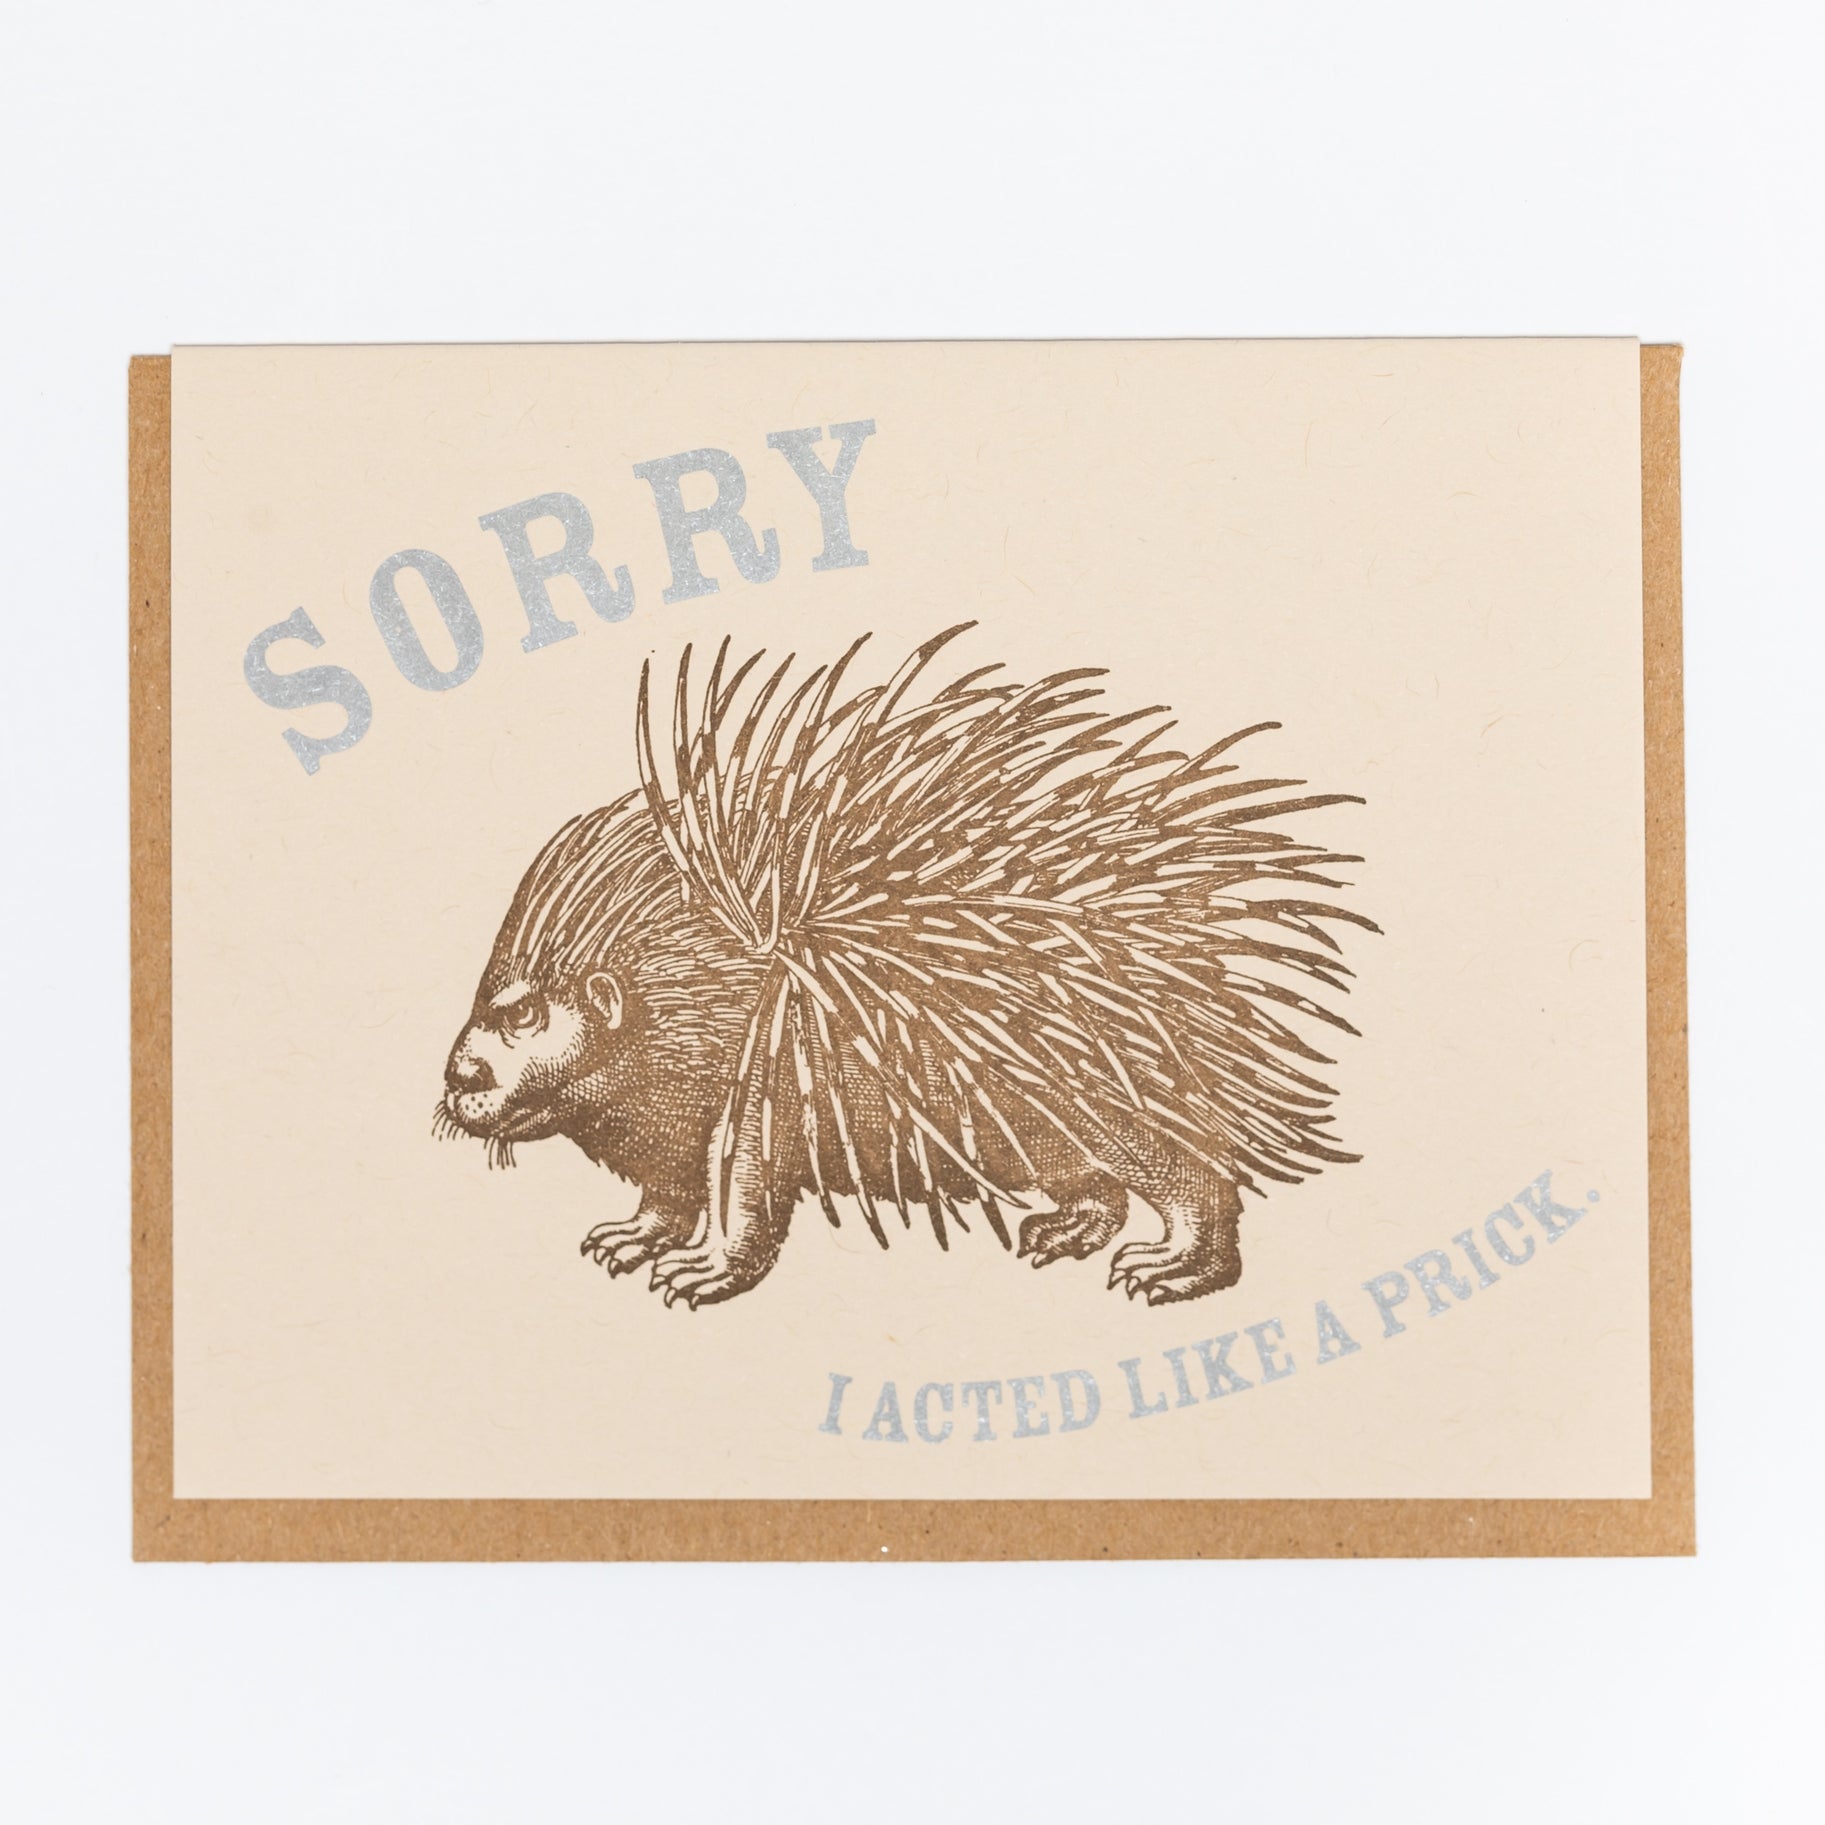 Tan card with light blue text saying, "Sorry I Acted Like a Prick". Image of an angry brown porupine in center of card.  A brown envelope is included.